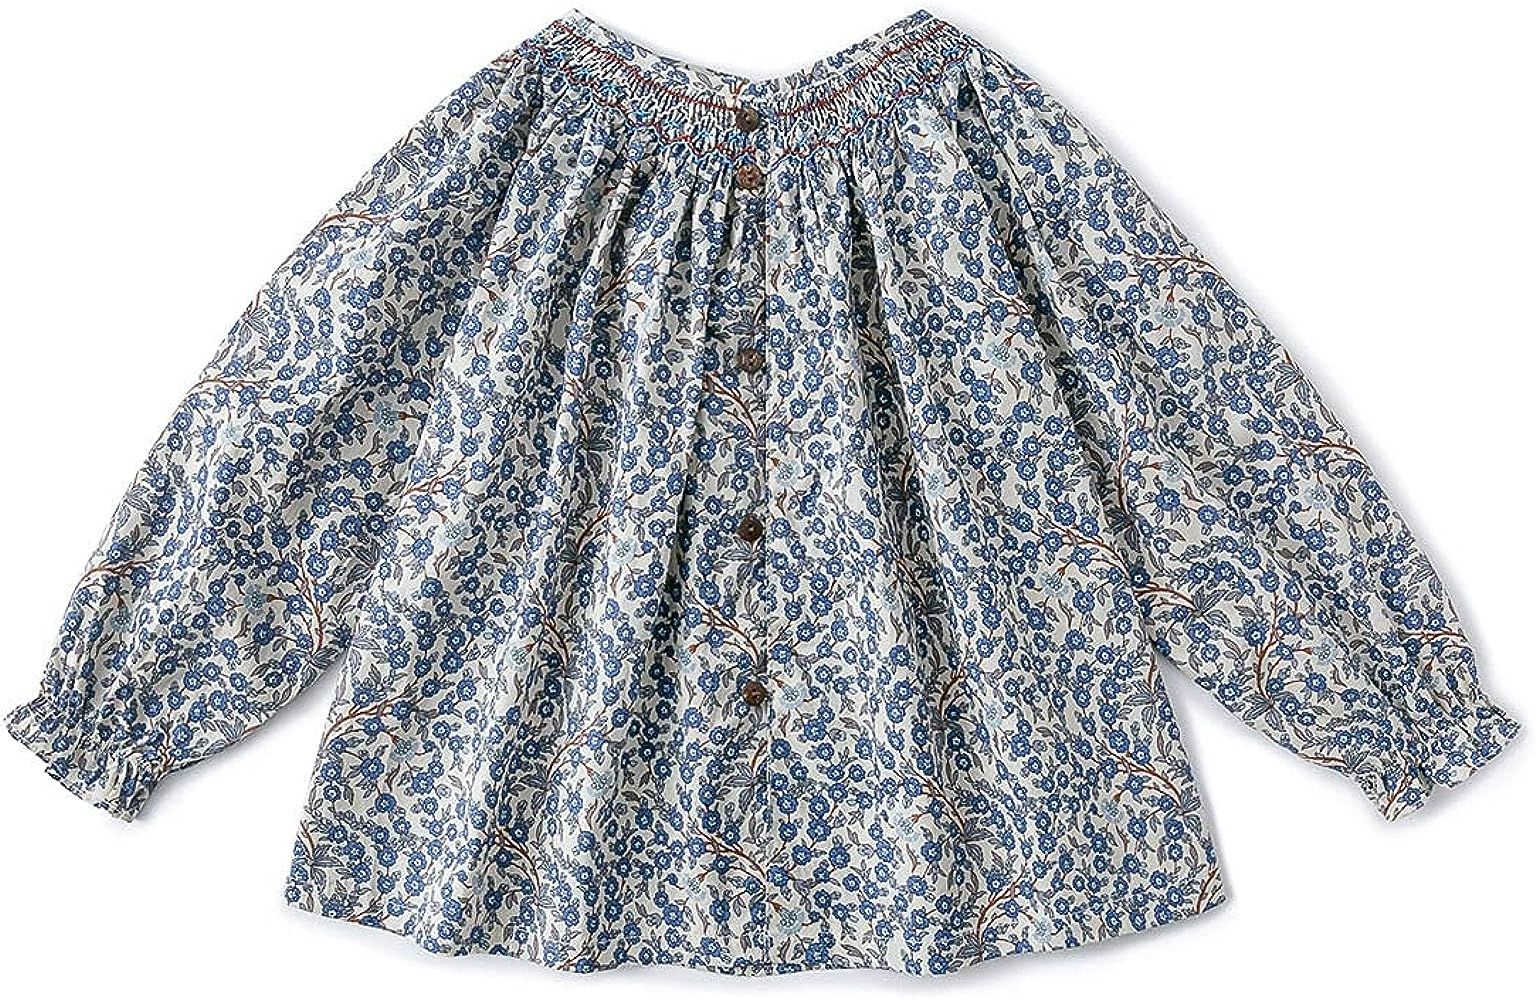 Curipeer Long Sleeve Baby Girls Blouse Casual Floral Toddler Girl Cotton Tops Shirt for Spring | Amazon (US)